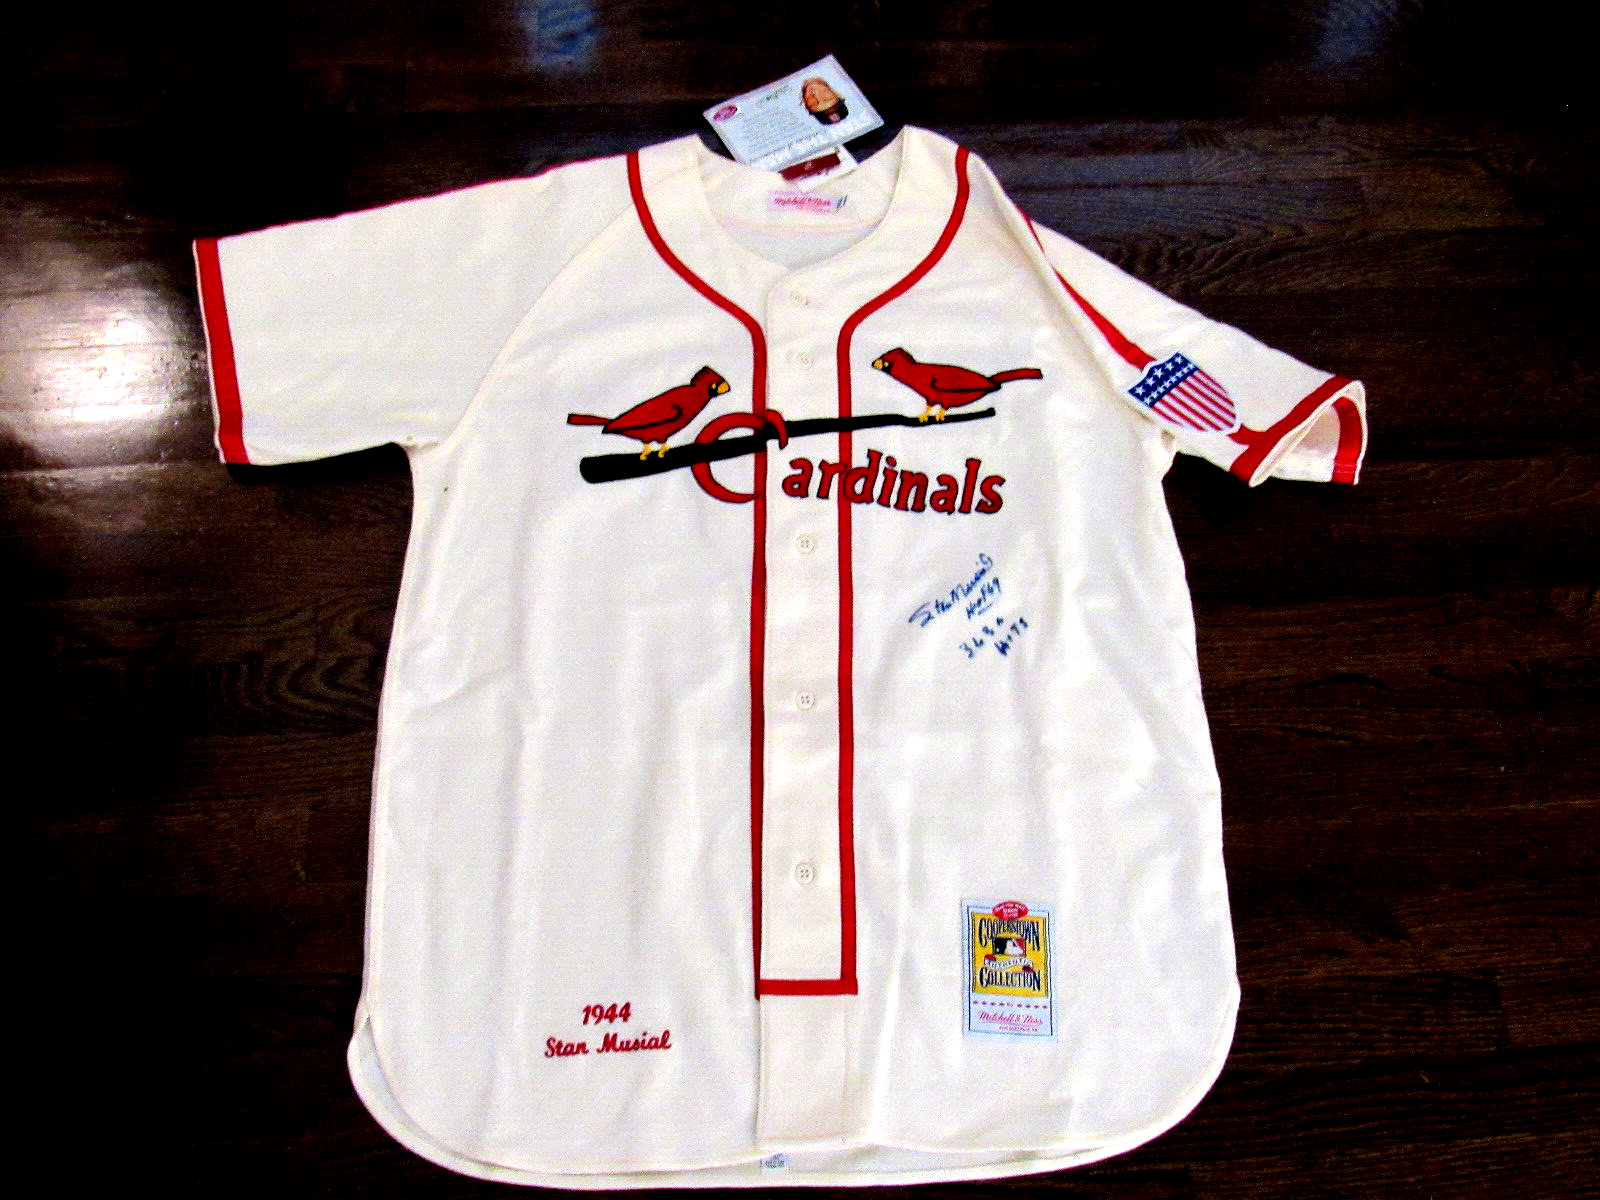 STAN MUSIAL HOF 69 3630 HITS CARDINALS SIGNED AUTO MITCHELL & NESS JERSEY STM - $890.99